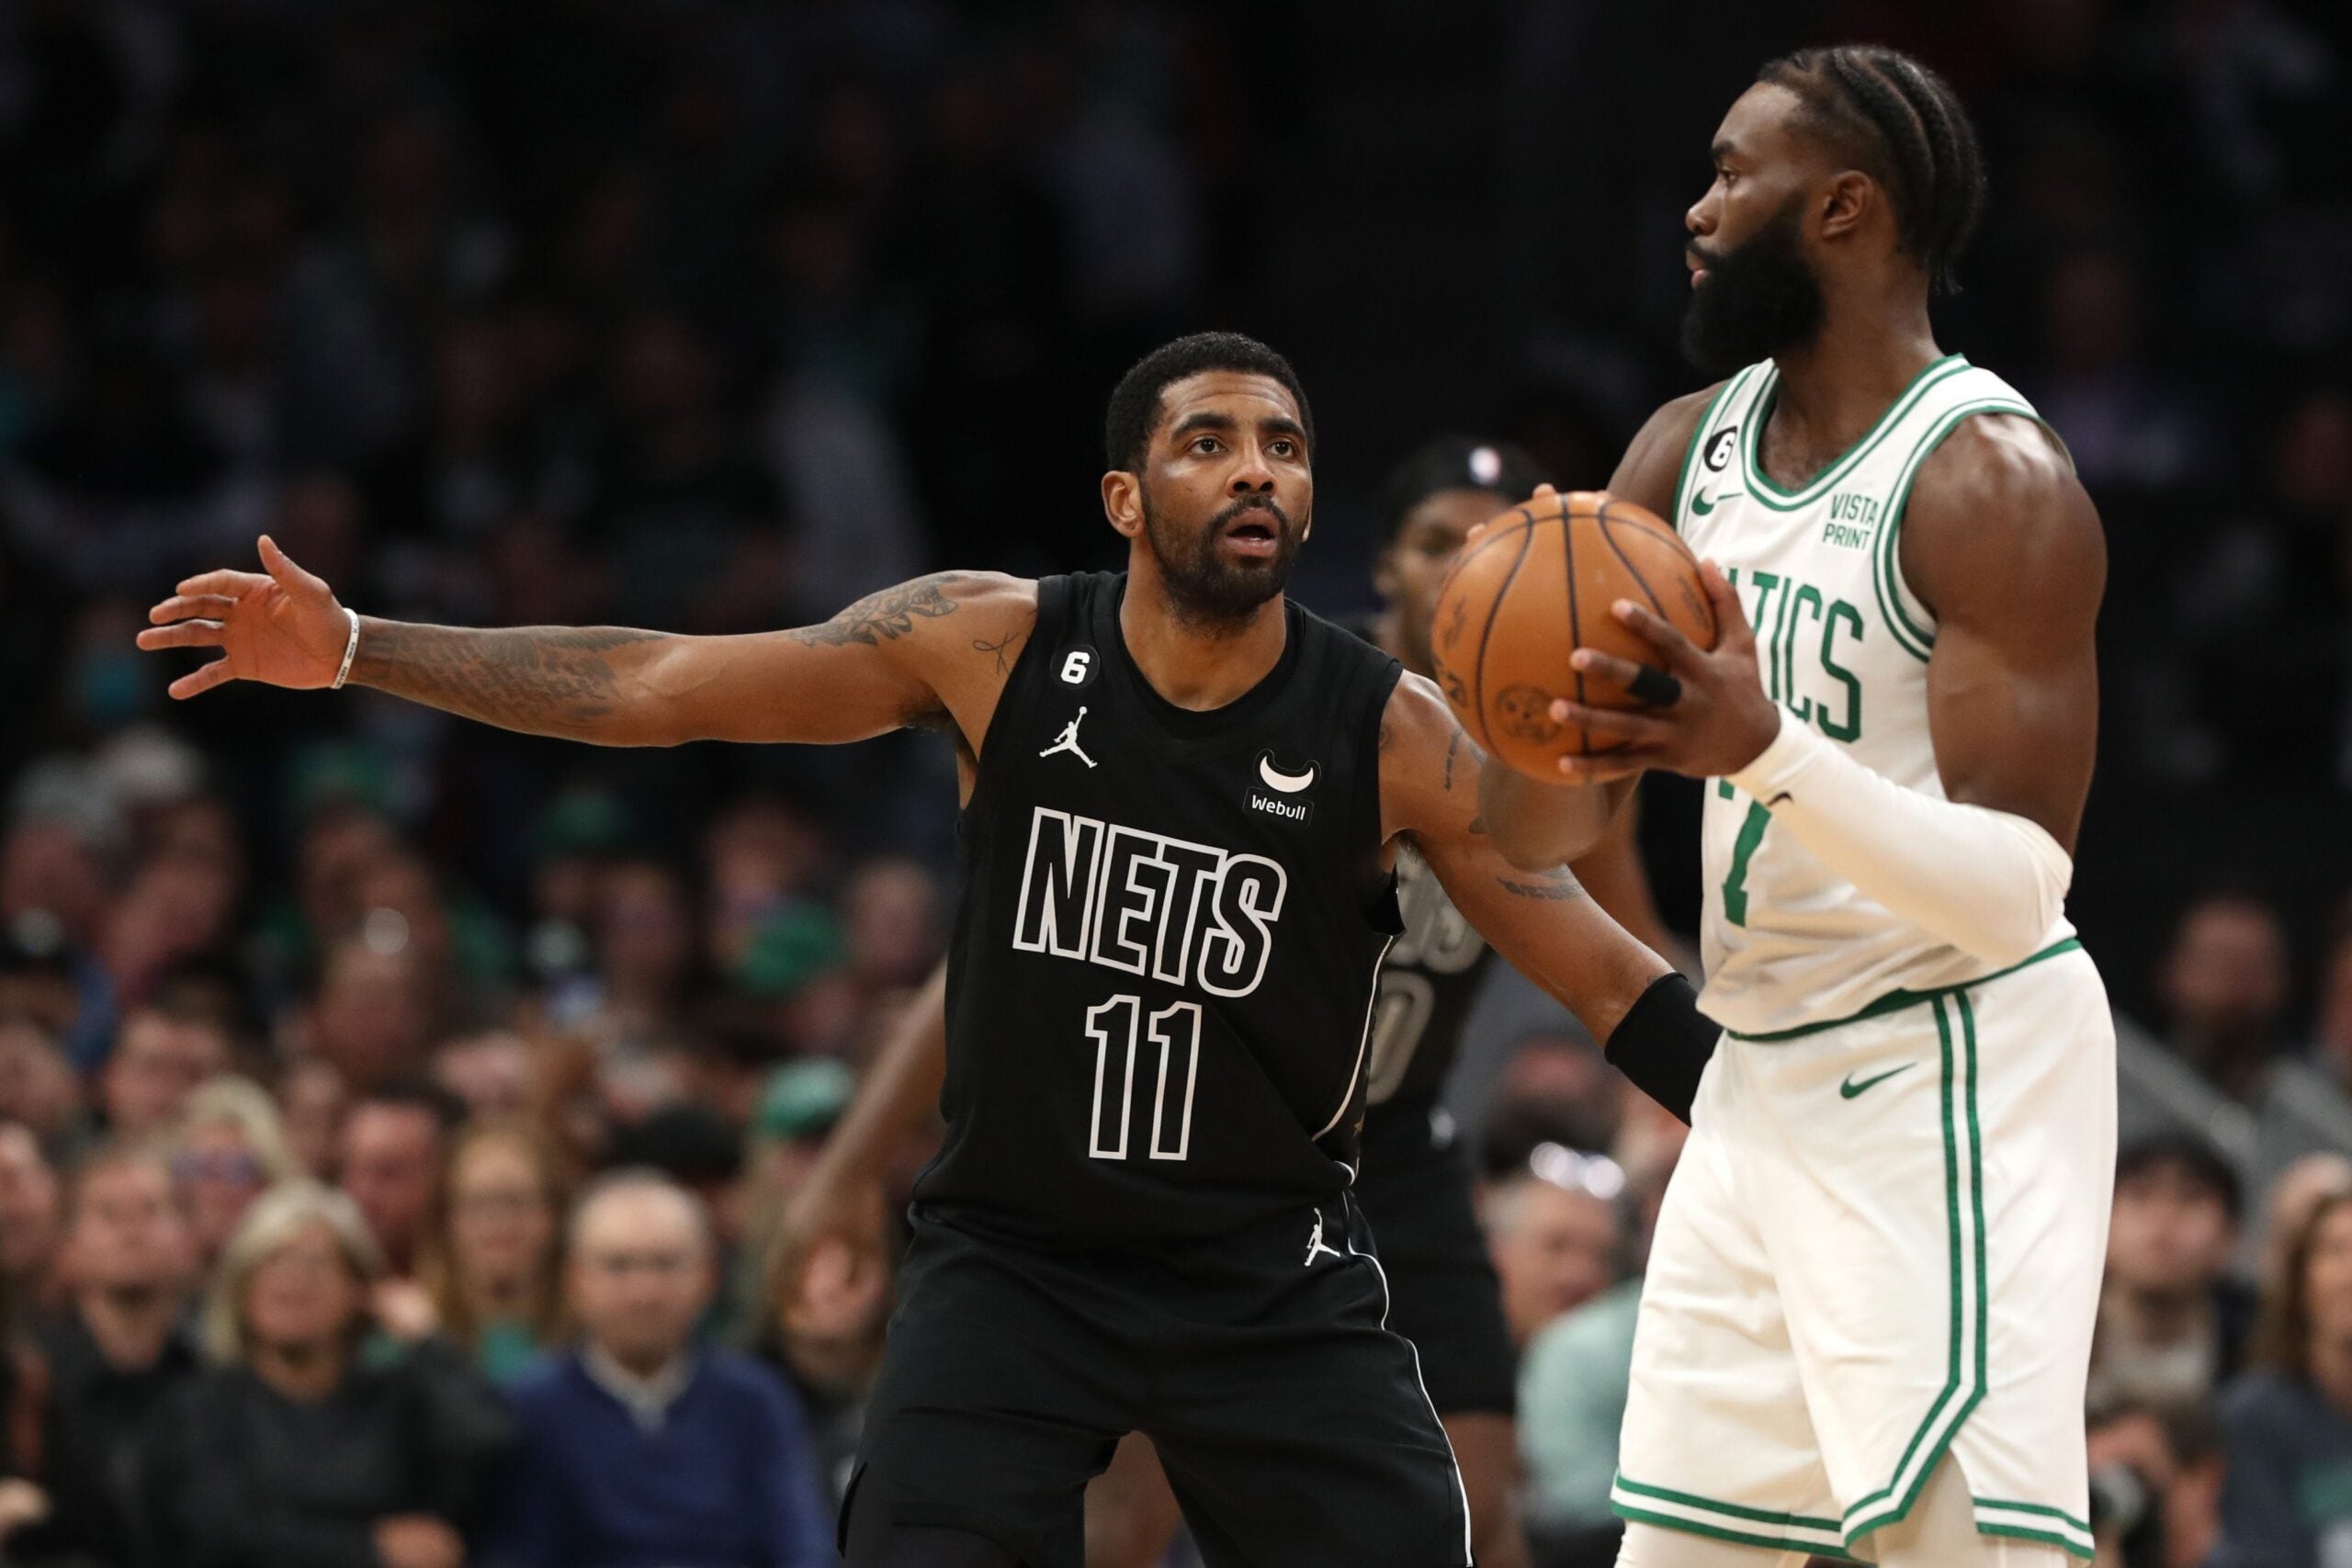 Kyrie Irving #11 of the Brooklyn Nets defends Jaylen Brown #7 of the Boston Celtics during the first half at TD Garden on February 01, 2023 in Boston, Massachusetts.